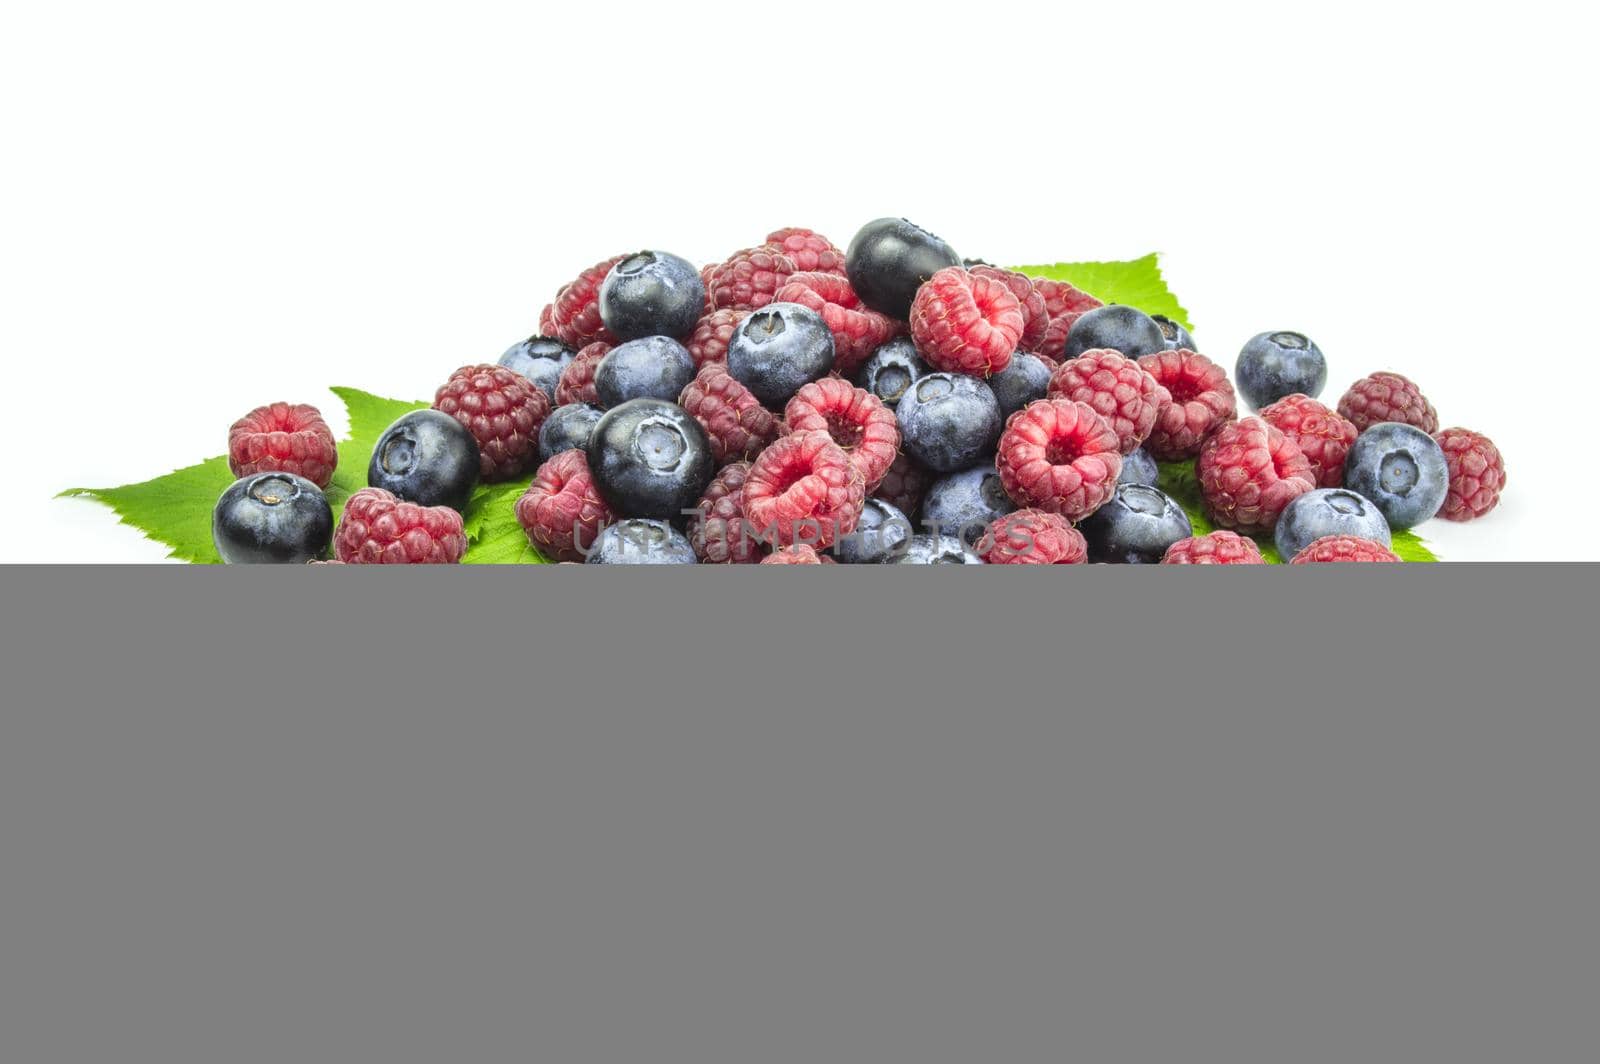 Blueberries , raspberries on white background by Proff